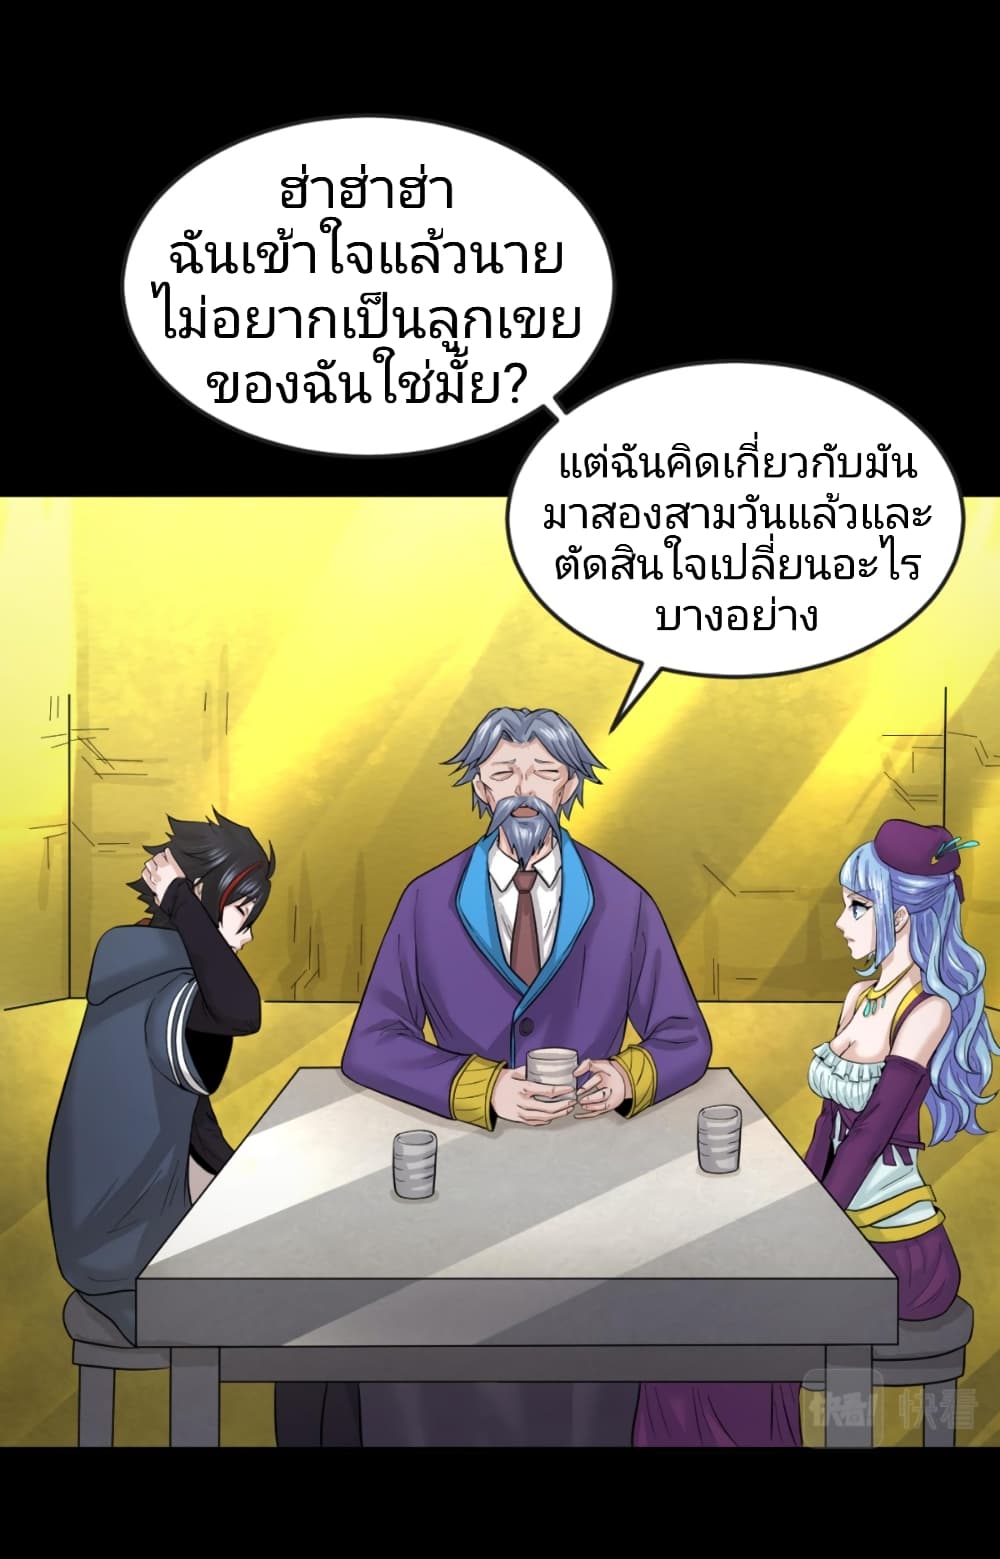 The Age of Ghost Spirits à¸à¸­à¸à¸à¸µà¹ 40 (19)